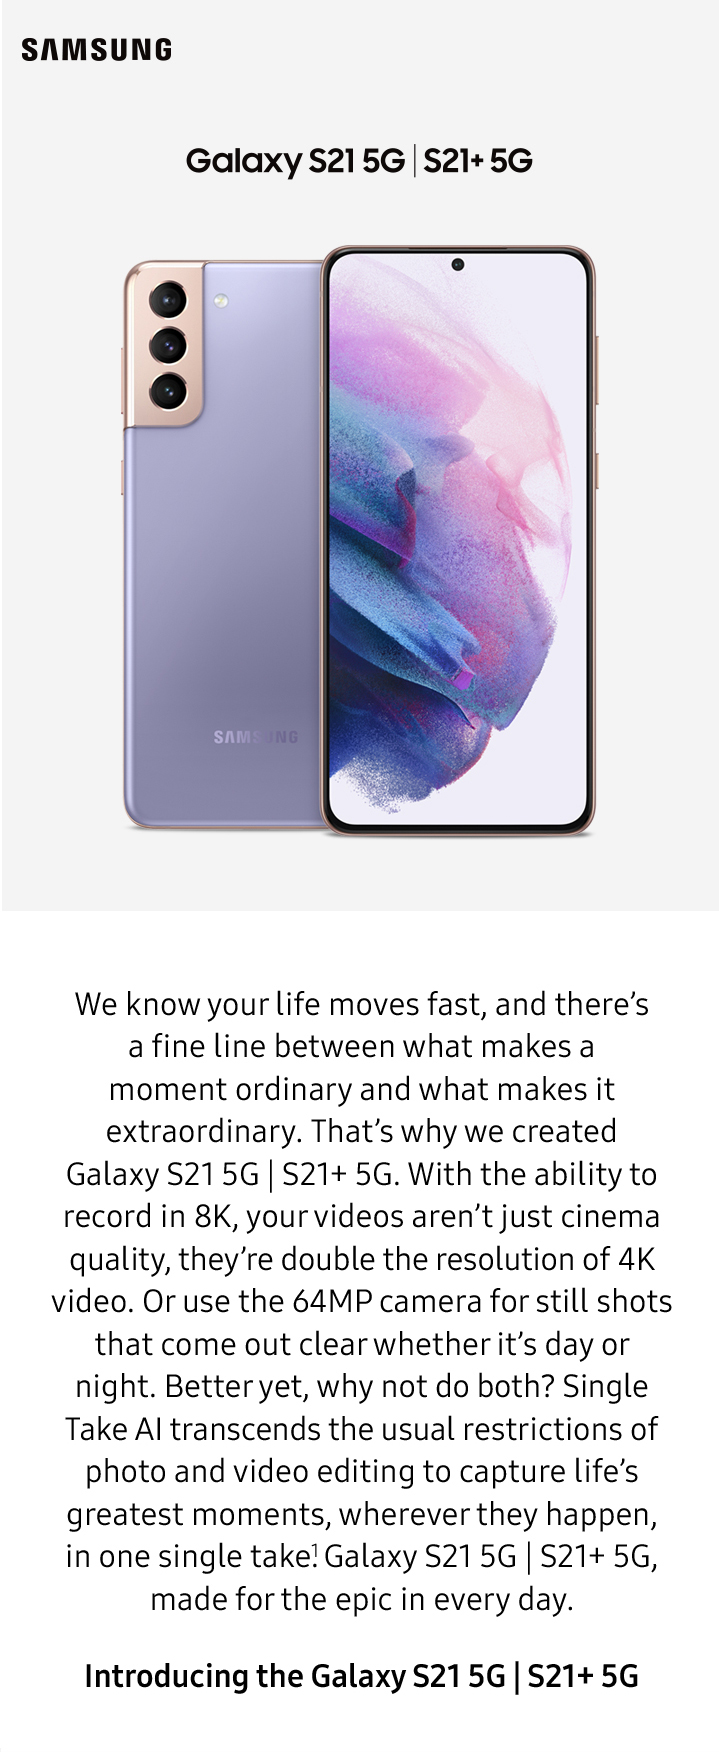 https://www.uscellular.com/content/dam/uscc-static/assets/commerce/catalog/devices/223210/tabs/images/Samsung-Galaxy-S21-5G_hero-mobile.jpg